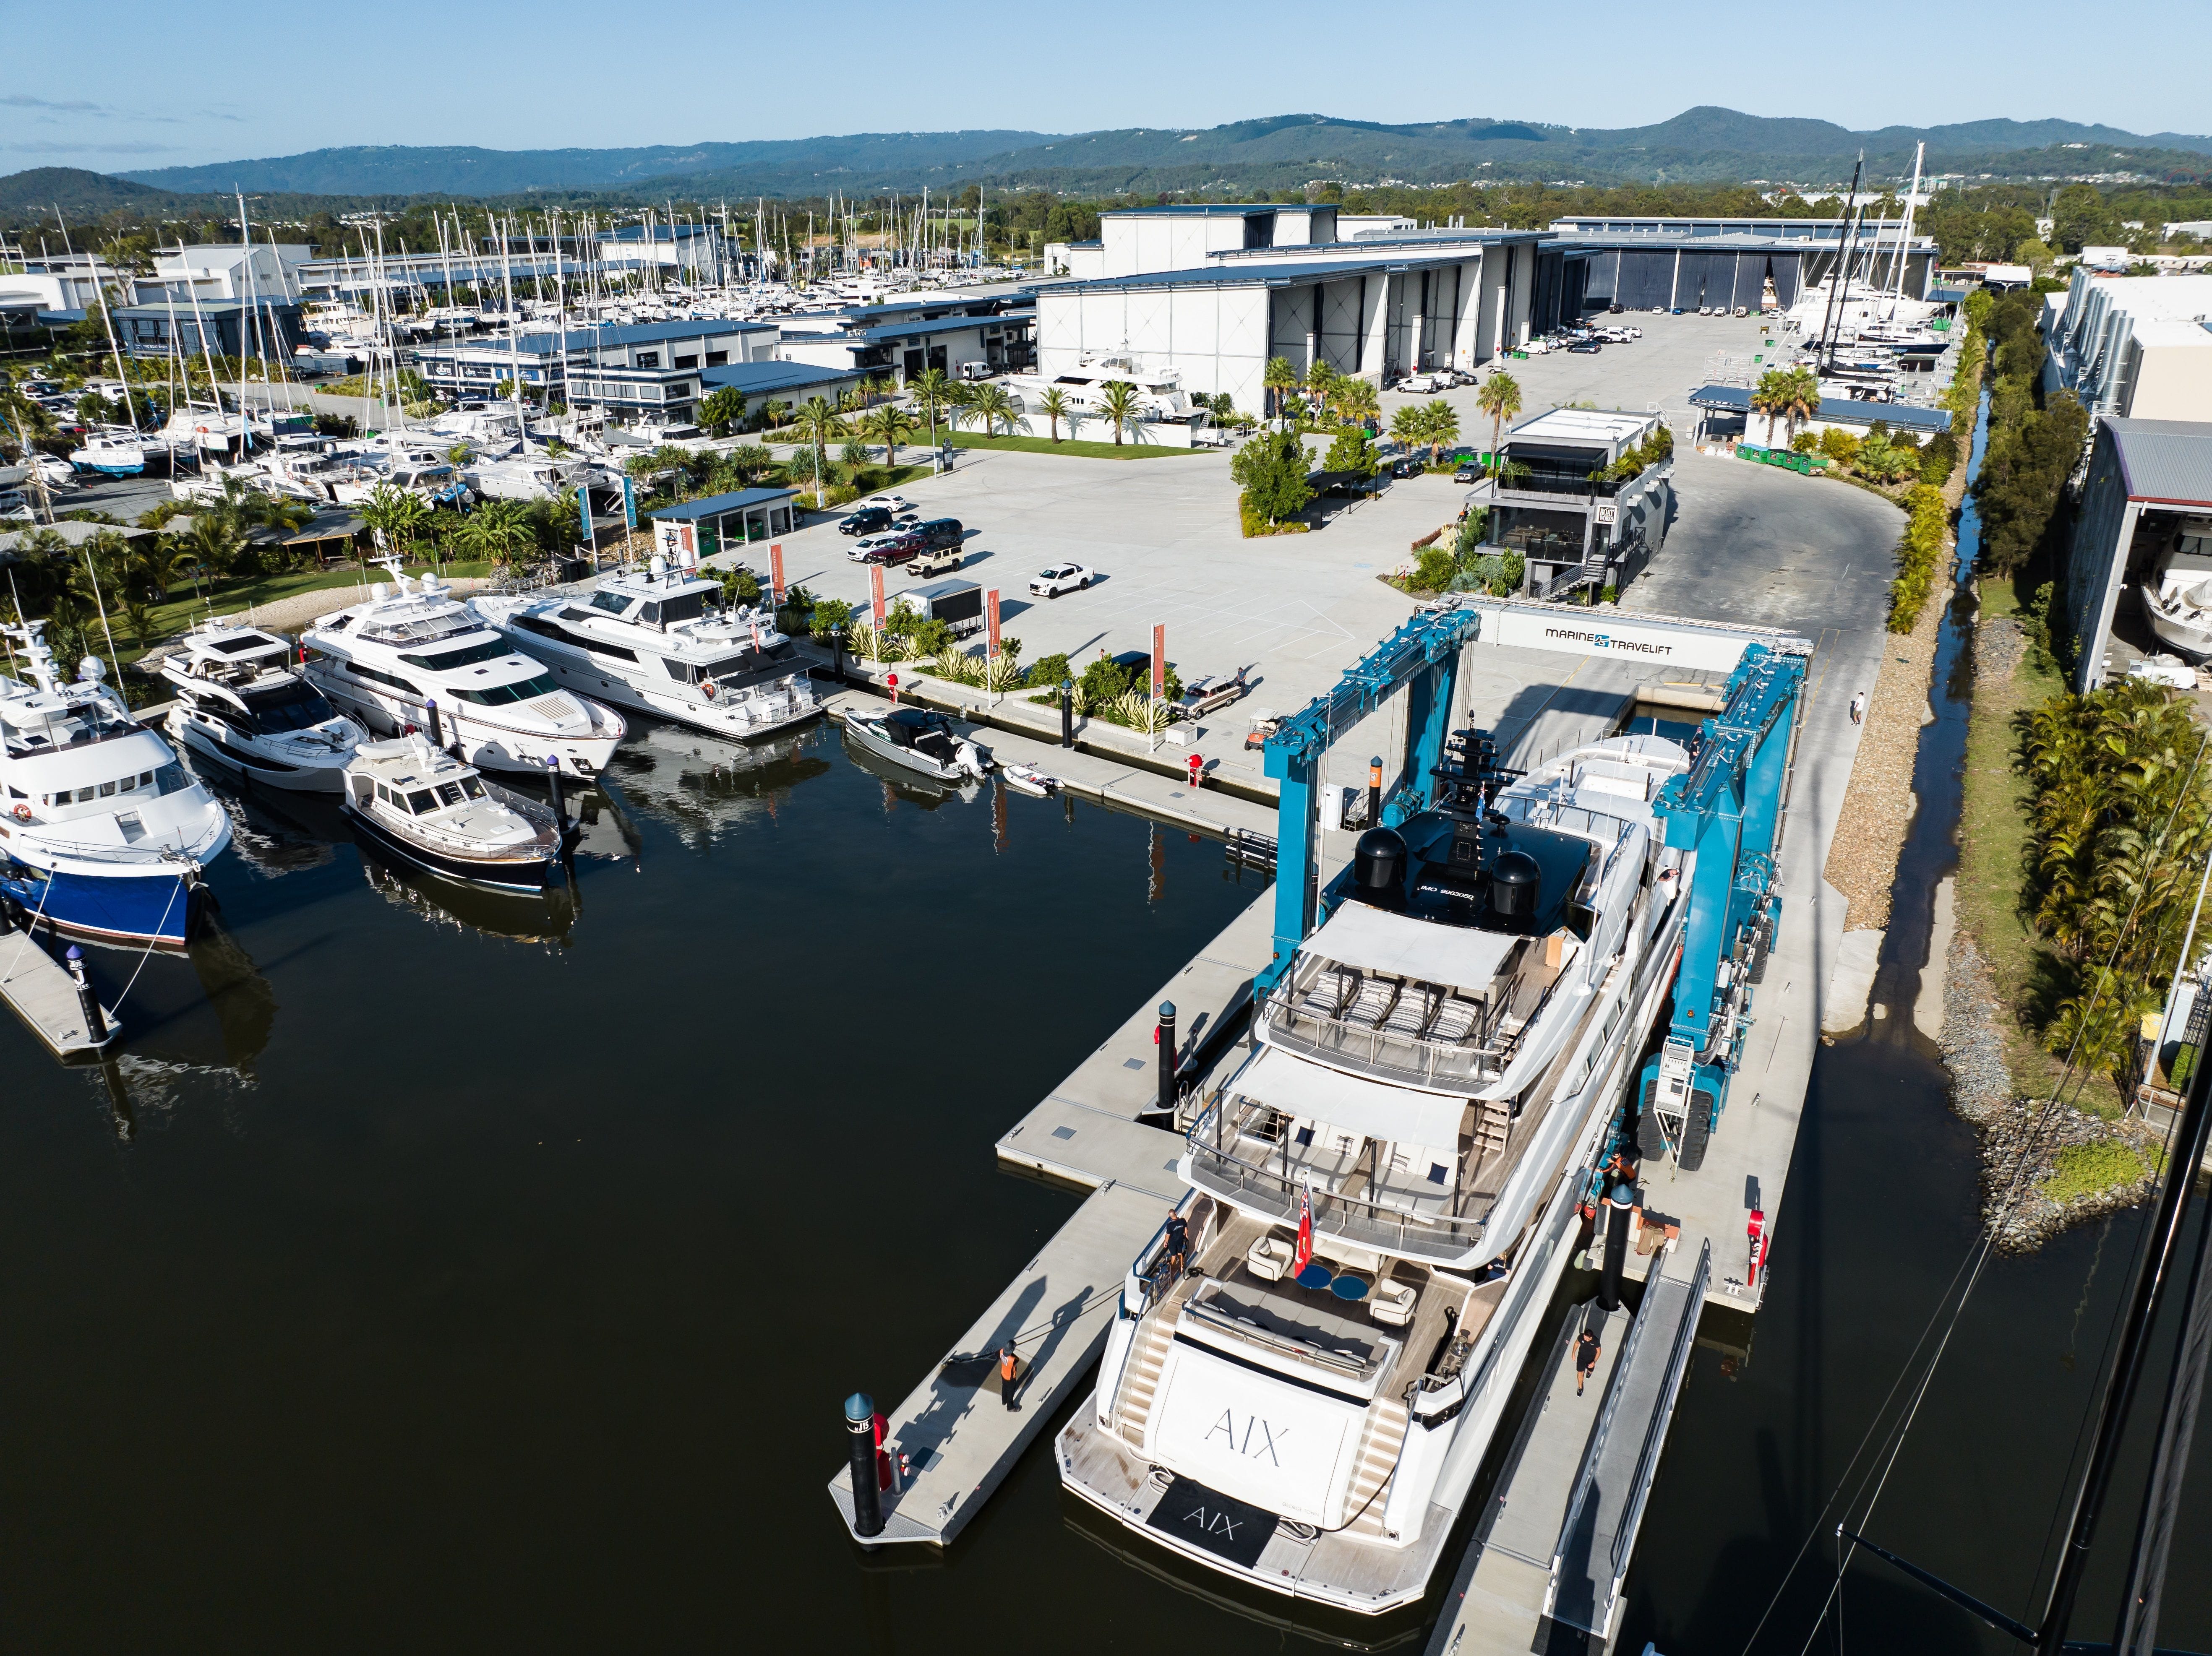 Longhurst tops up $200m spend with $30m Boat Works expansion amid Gold Coast boating boom